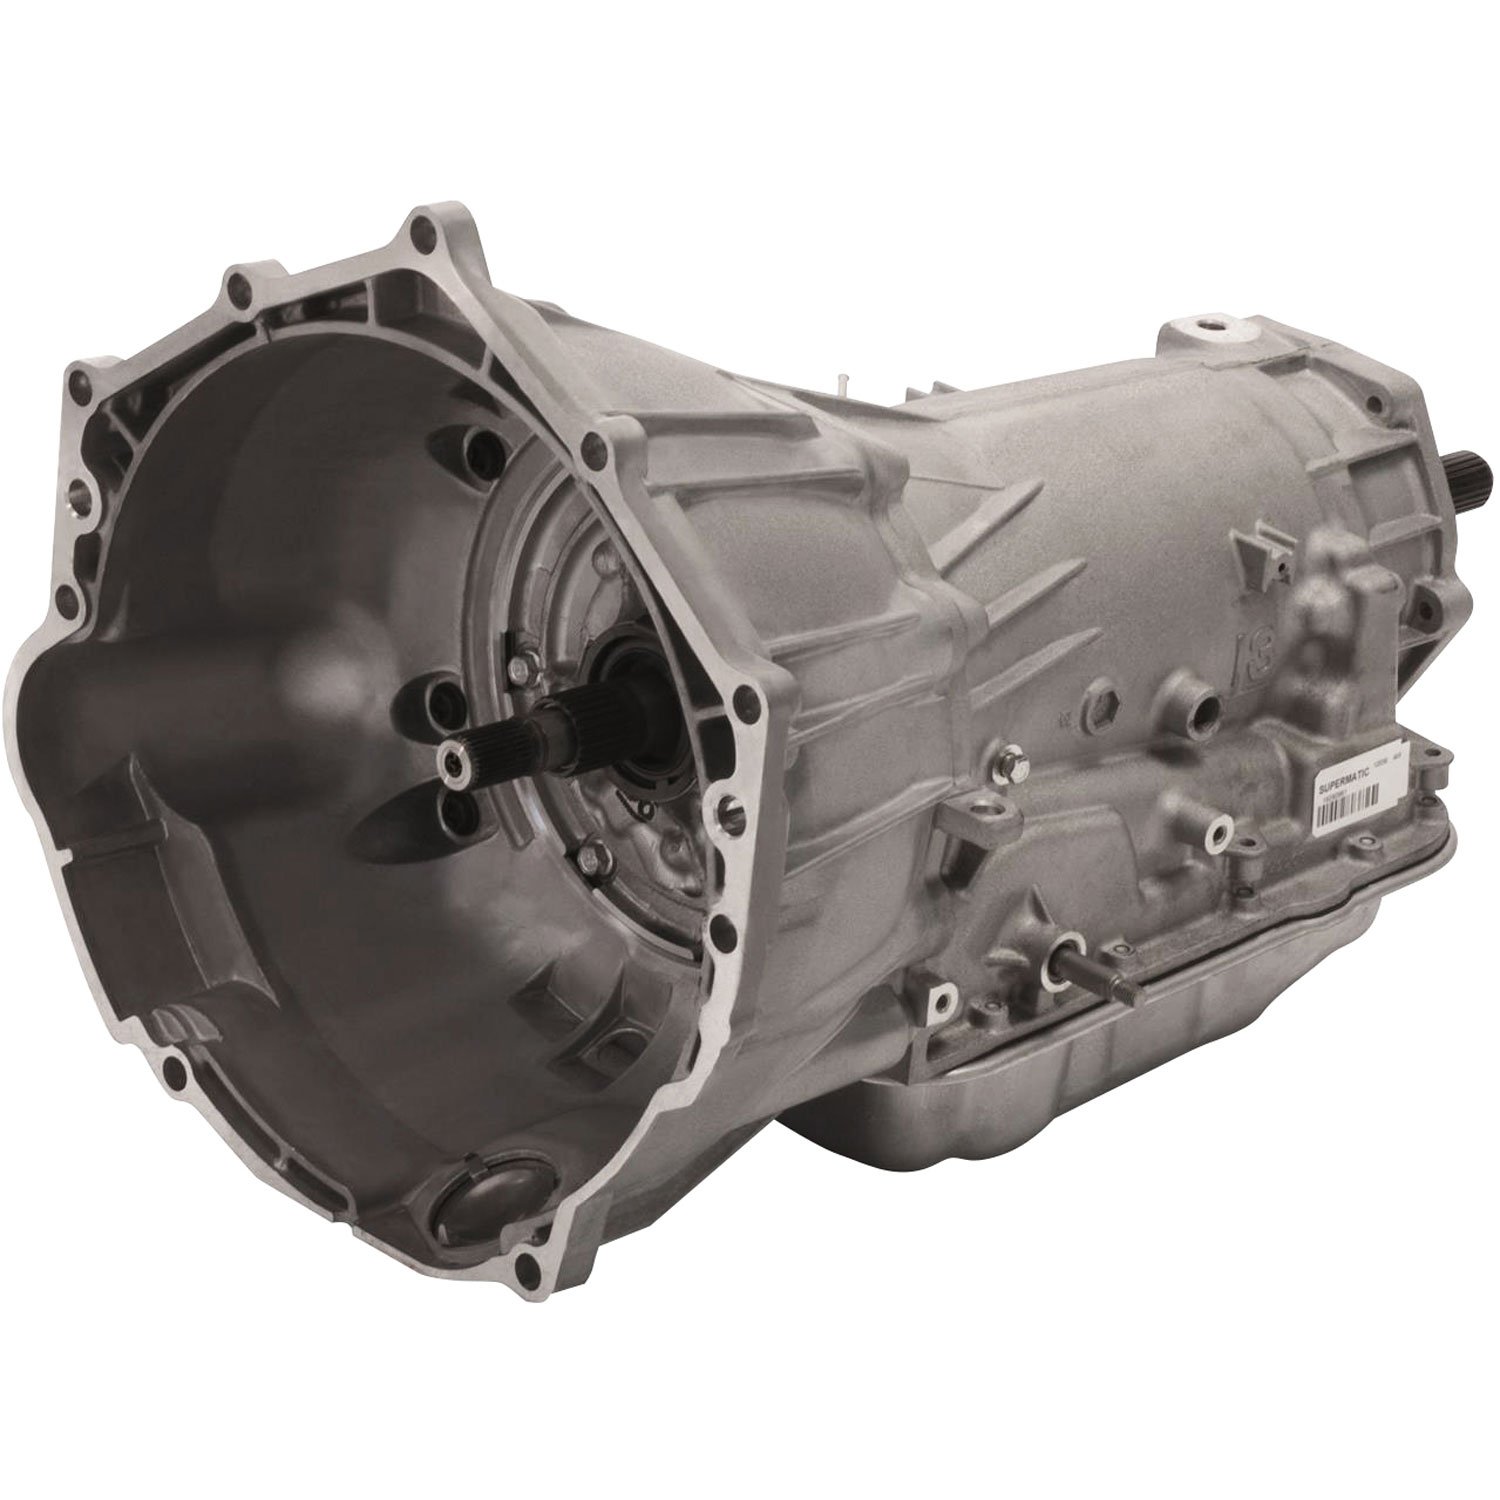 SuperMatic 4L70-E 4WD Four-Speed Automatic Transmission